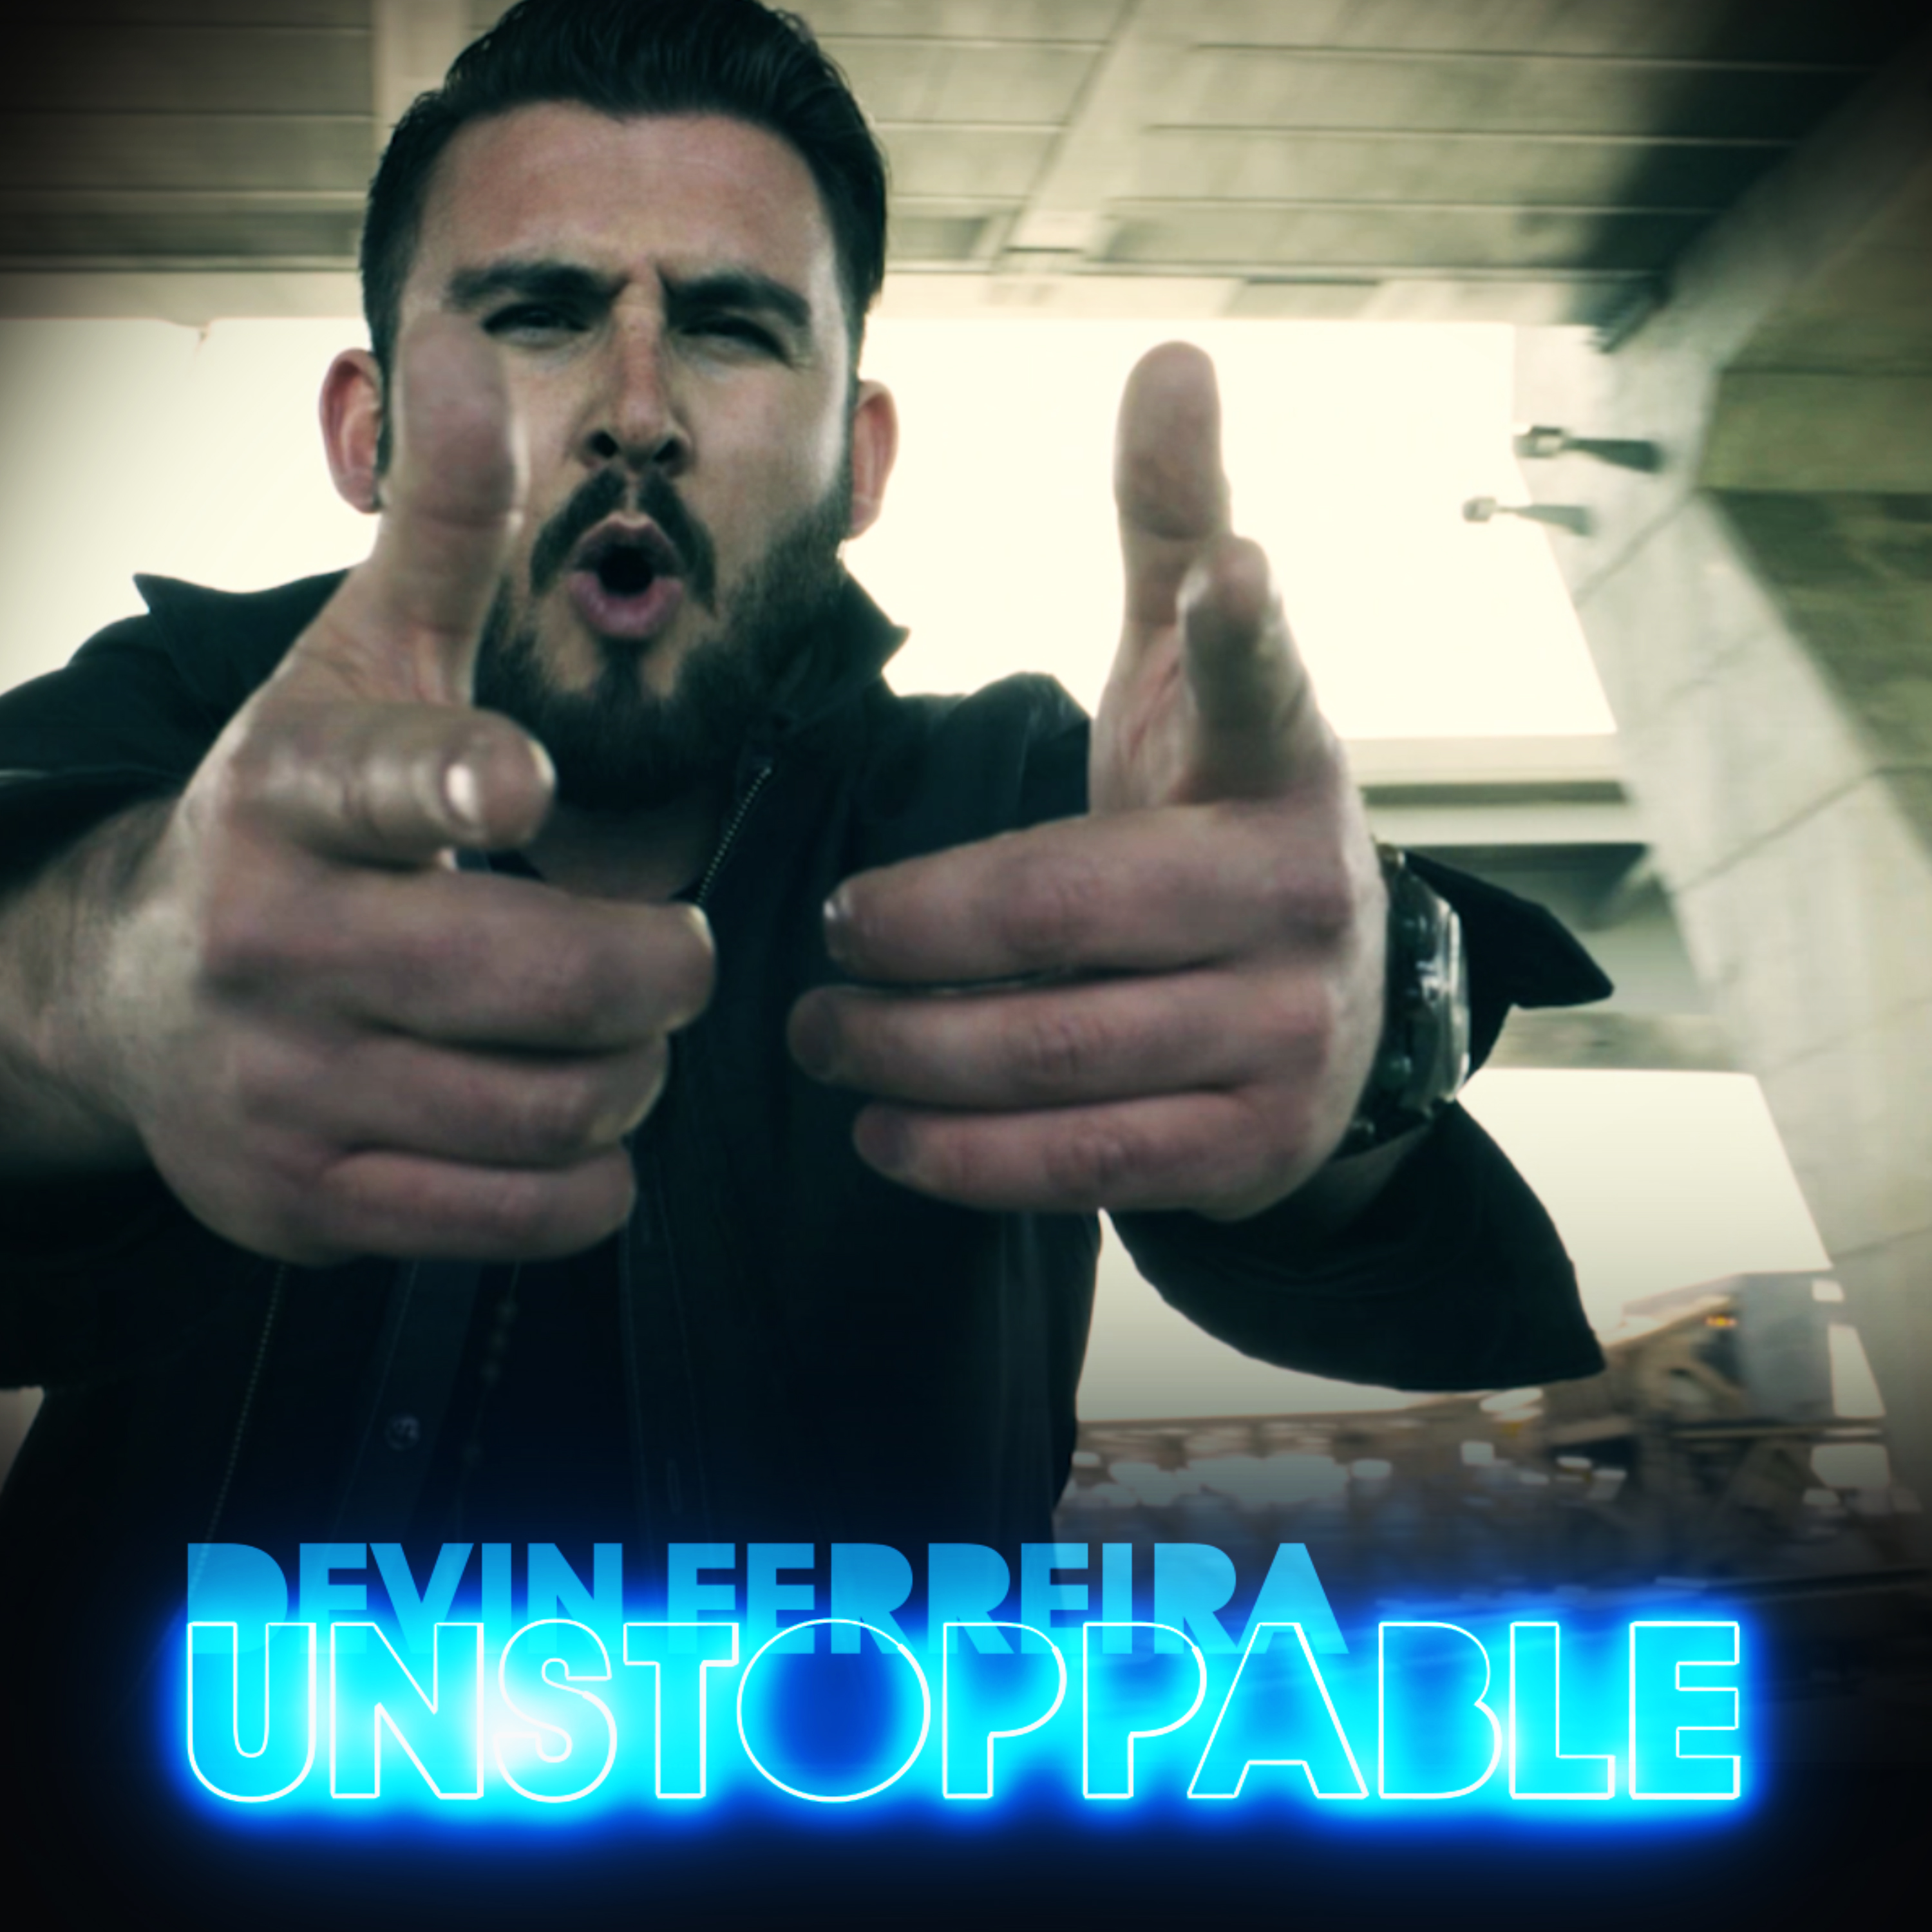 Devin dferreira's album cover, titled "Unstoppable" where he is pointing at camera with both hands, mouth open in a cicular shape. 